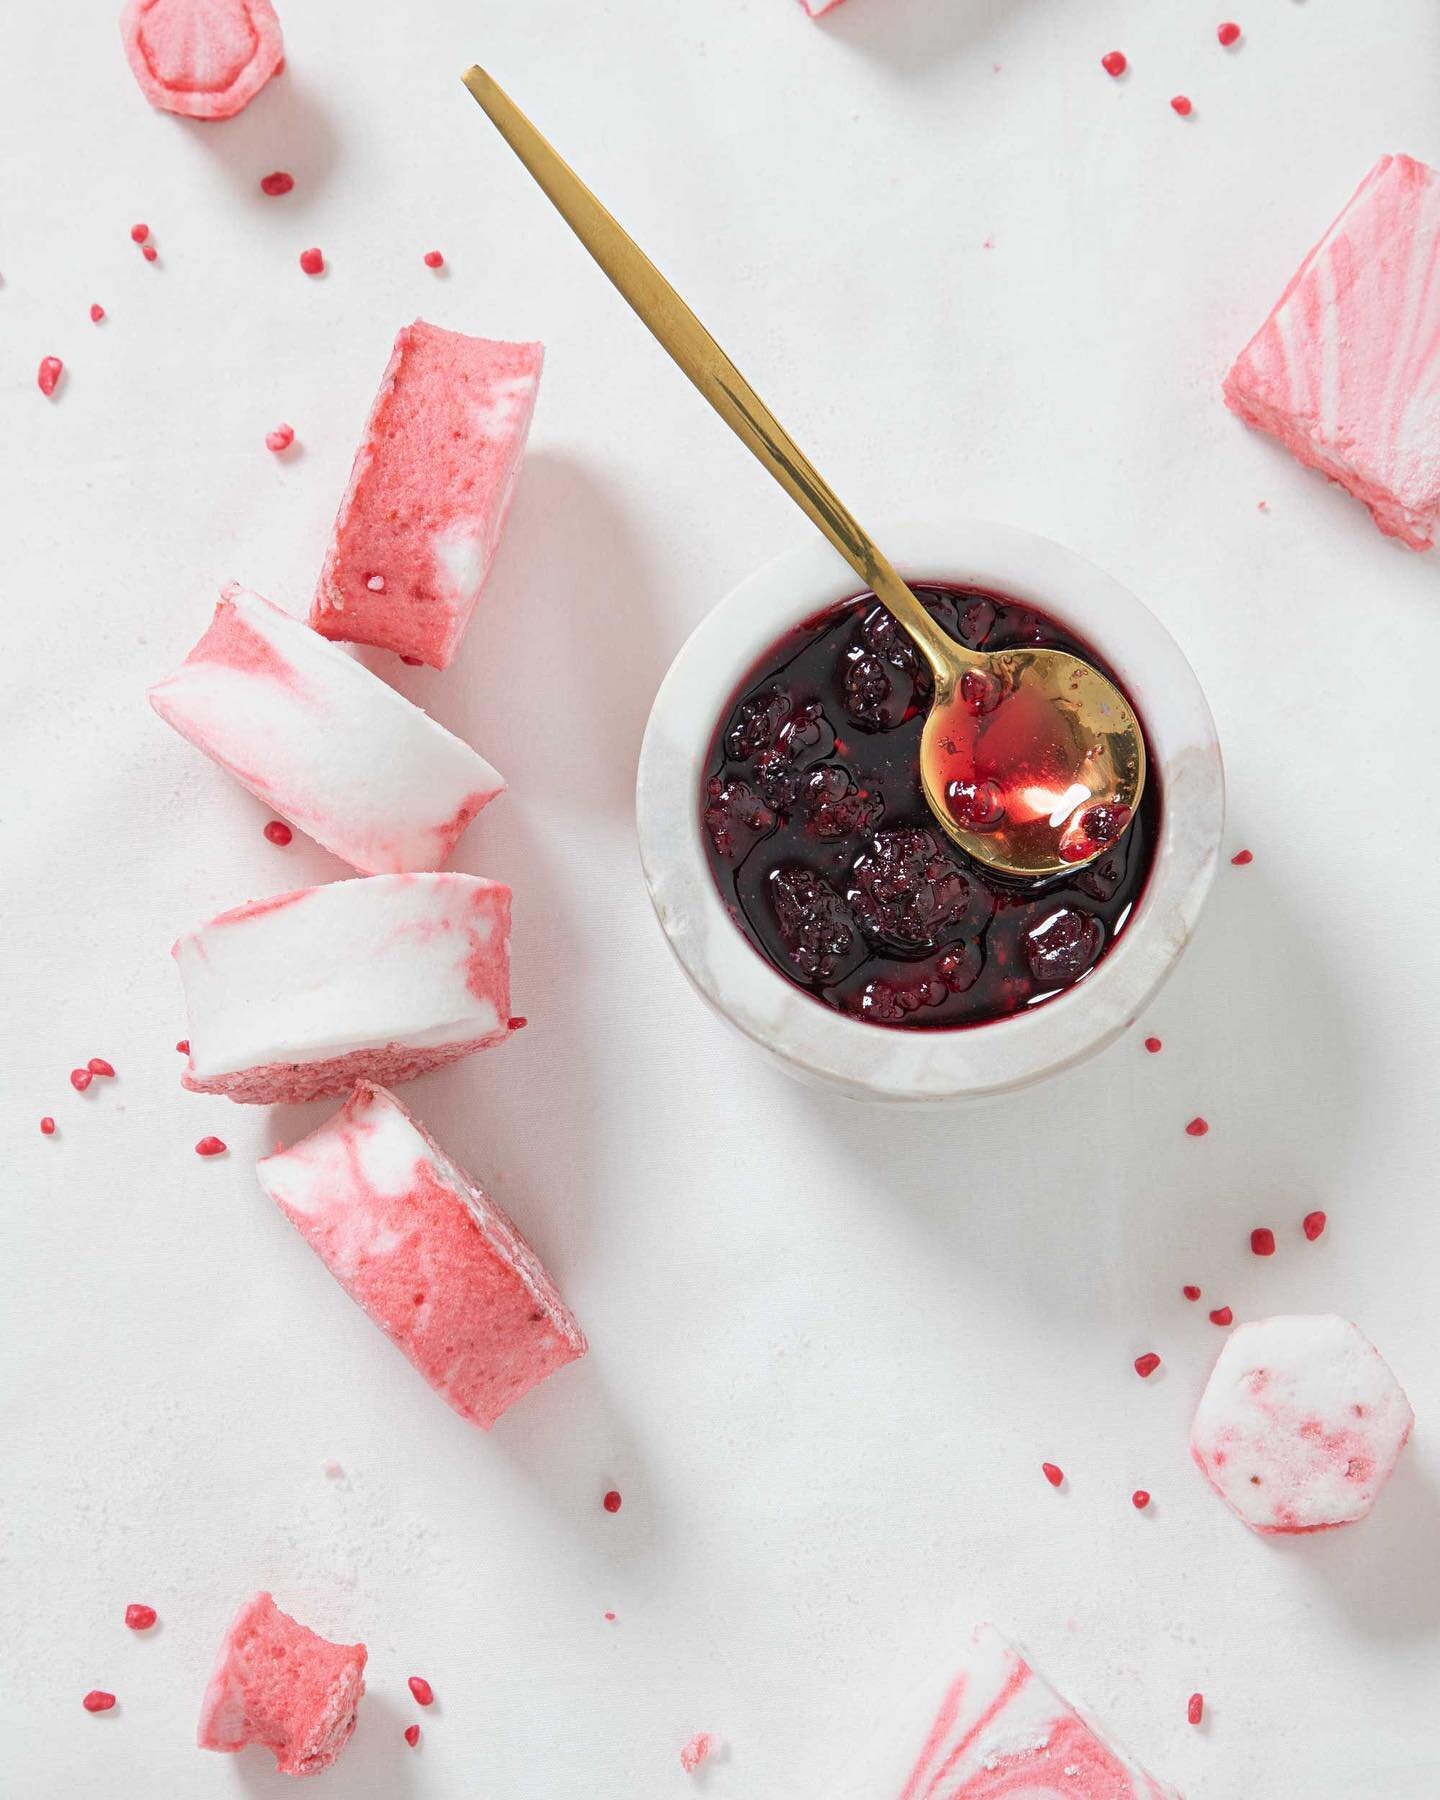 Experience the delightful homemade strawberry and vanilla marshmallows, elegantly paired with a vibrant berry compote - a celebration of sweet harmony in every bite. 
.
.
.
.
.
Photography by @amani_lindsell 
Menu by @dineinbybrookesilk @chef_brooke_